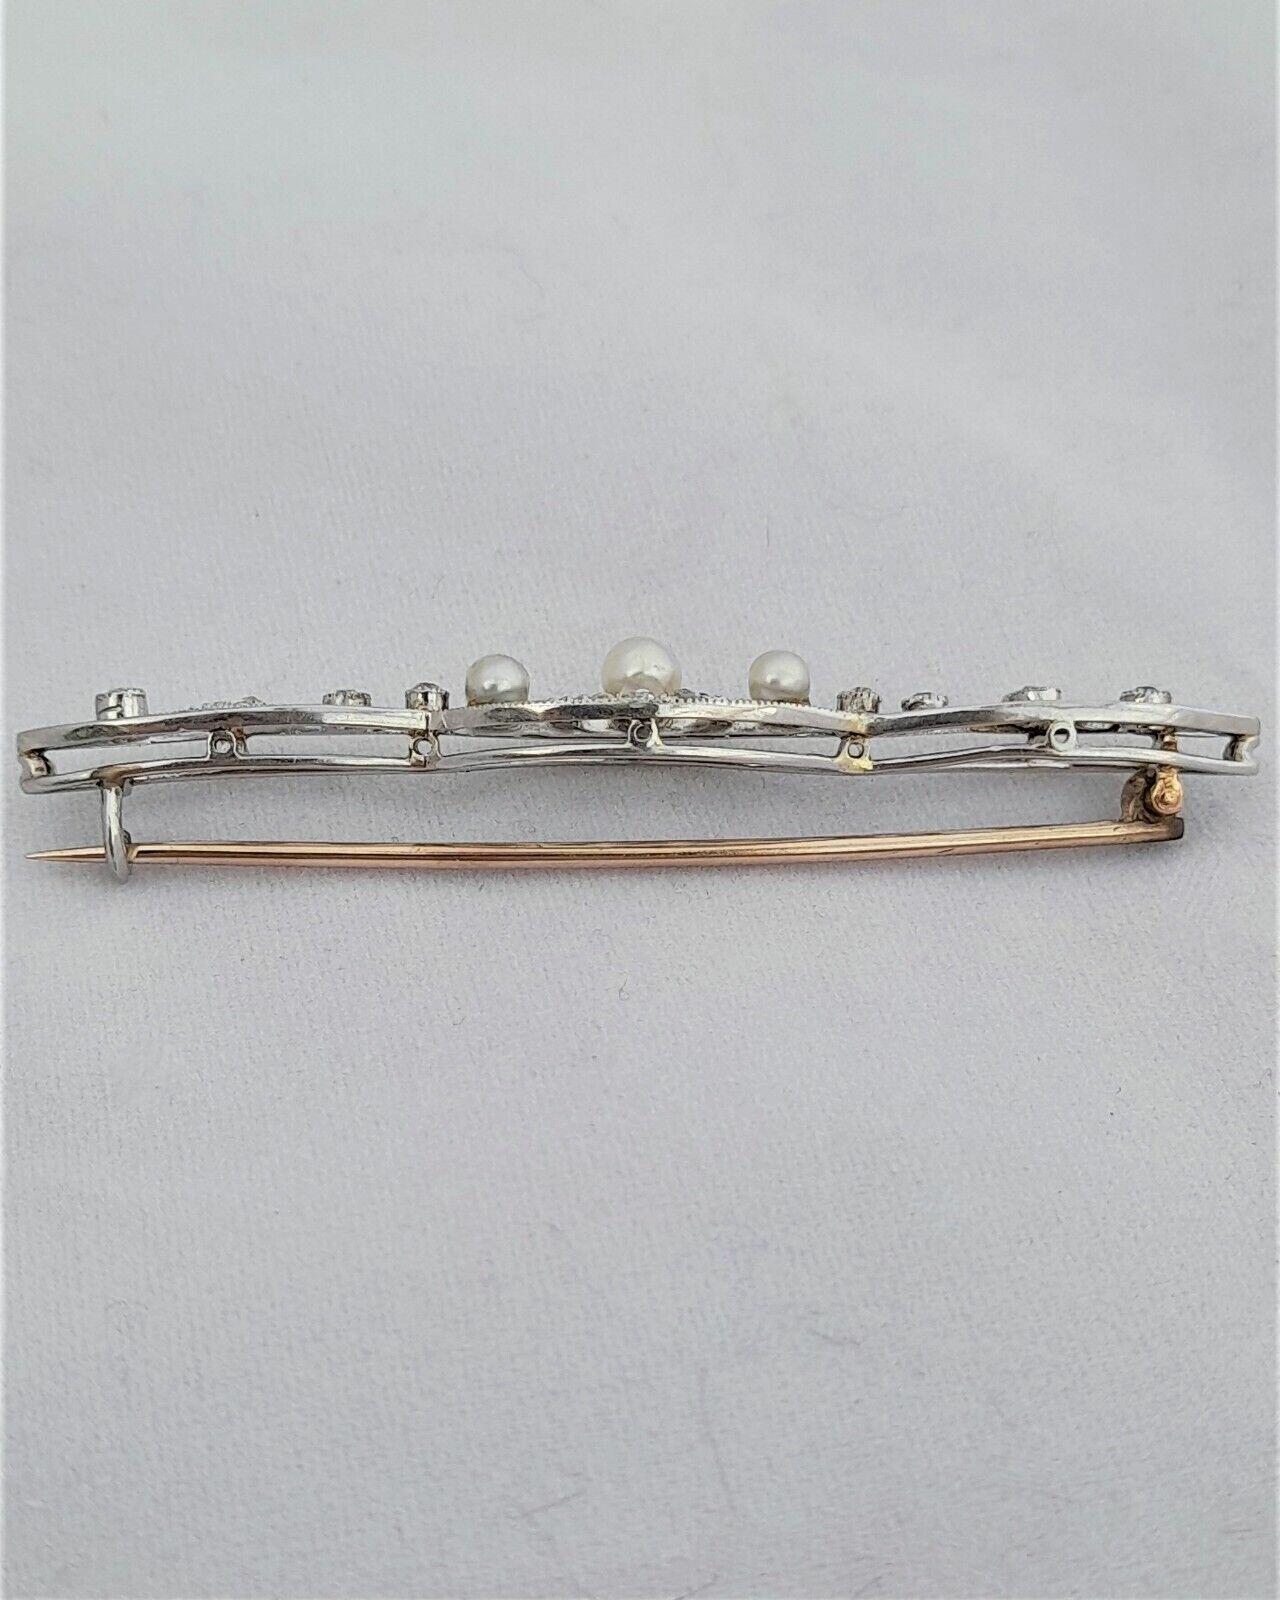 Edwardian 18ct Gold Digger Brooch set with a Rough Diamond (728L